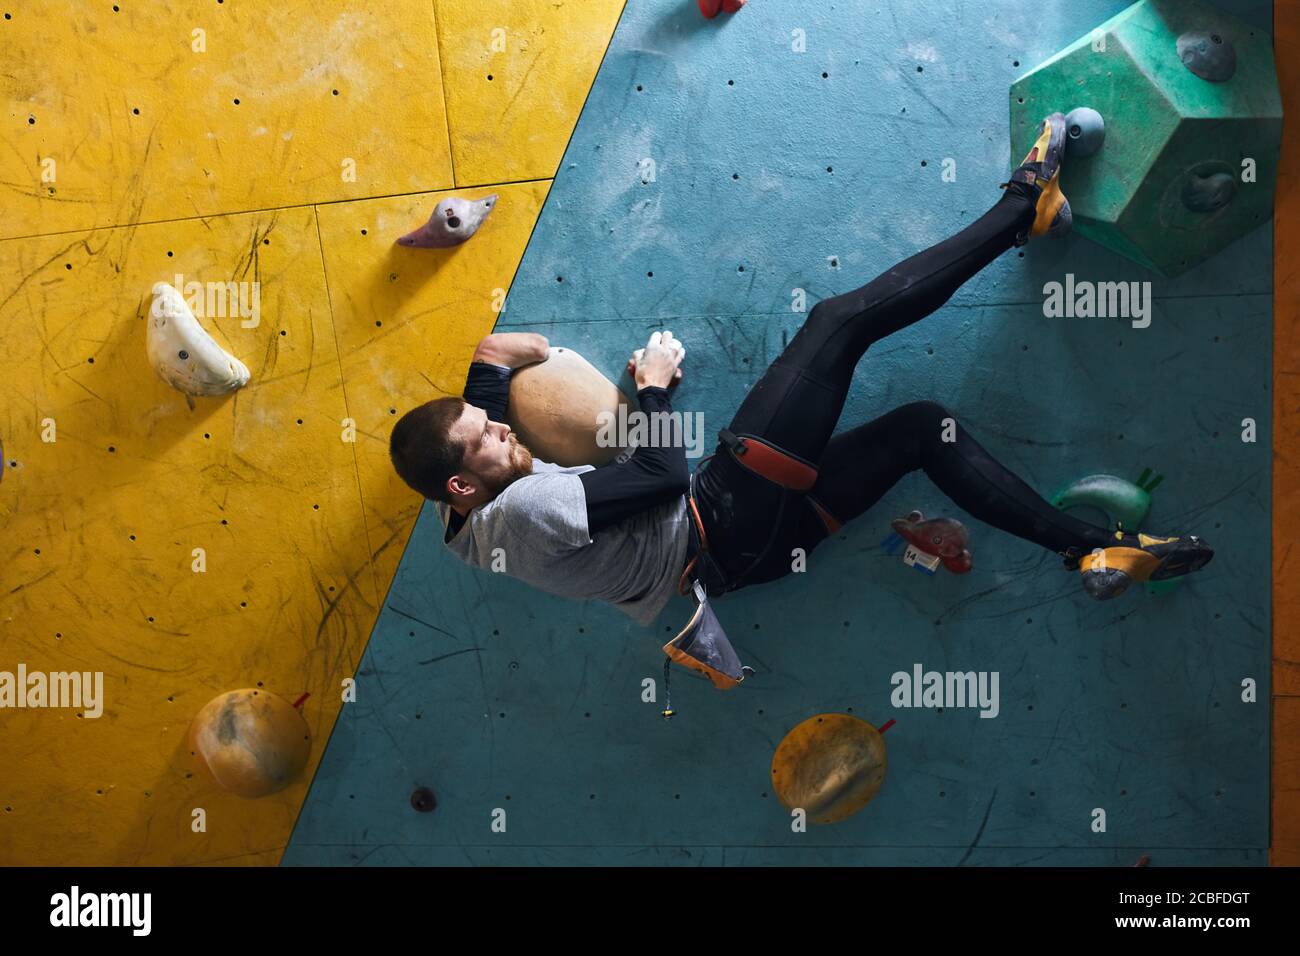 Side view of motivated active physically challenged boulderer with beard hanging at colourful climbing wall, holding large artificial rock, trying to Stock Photo